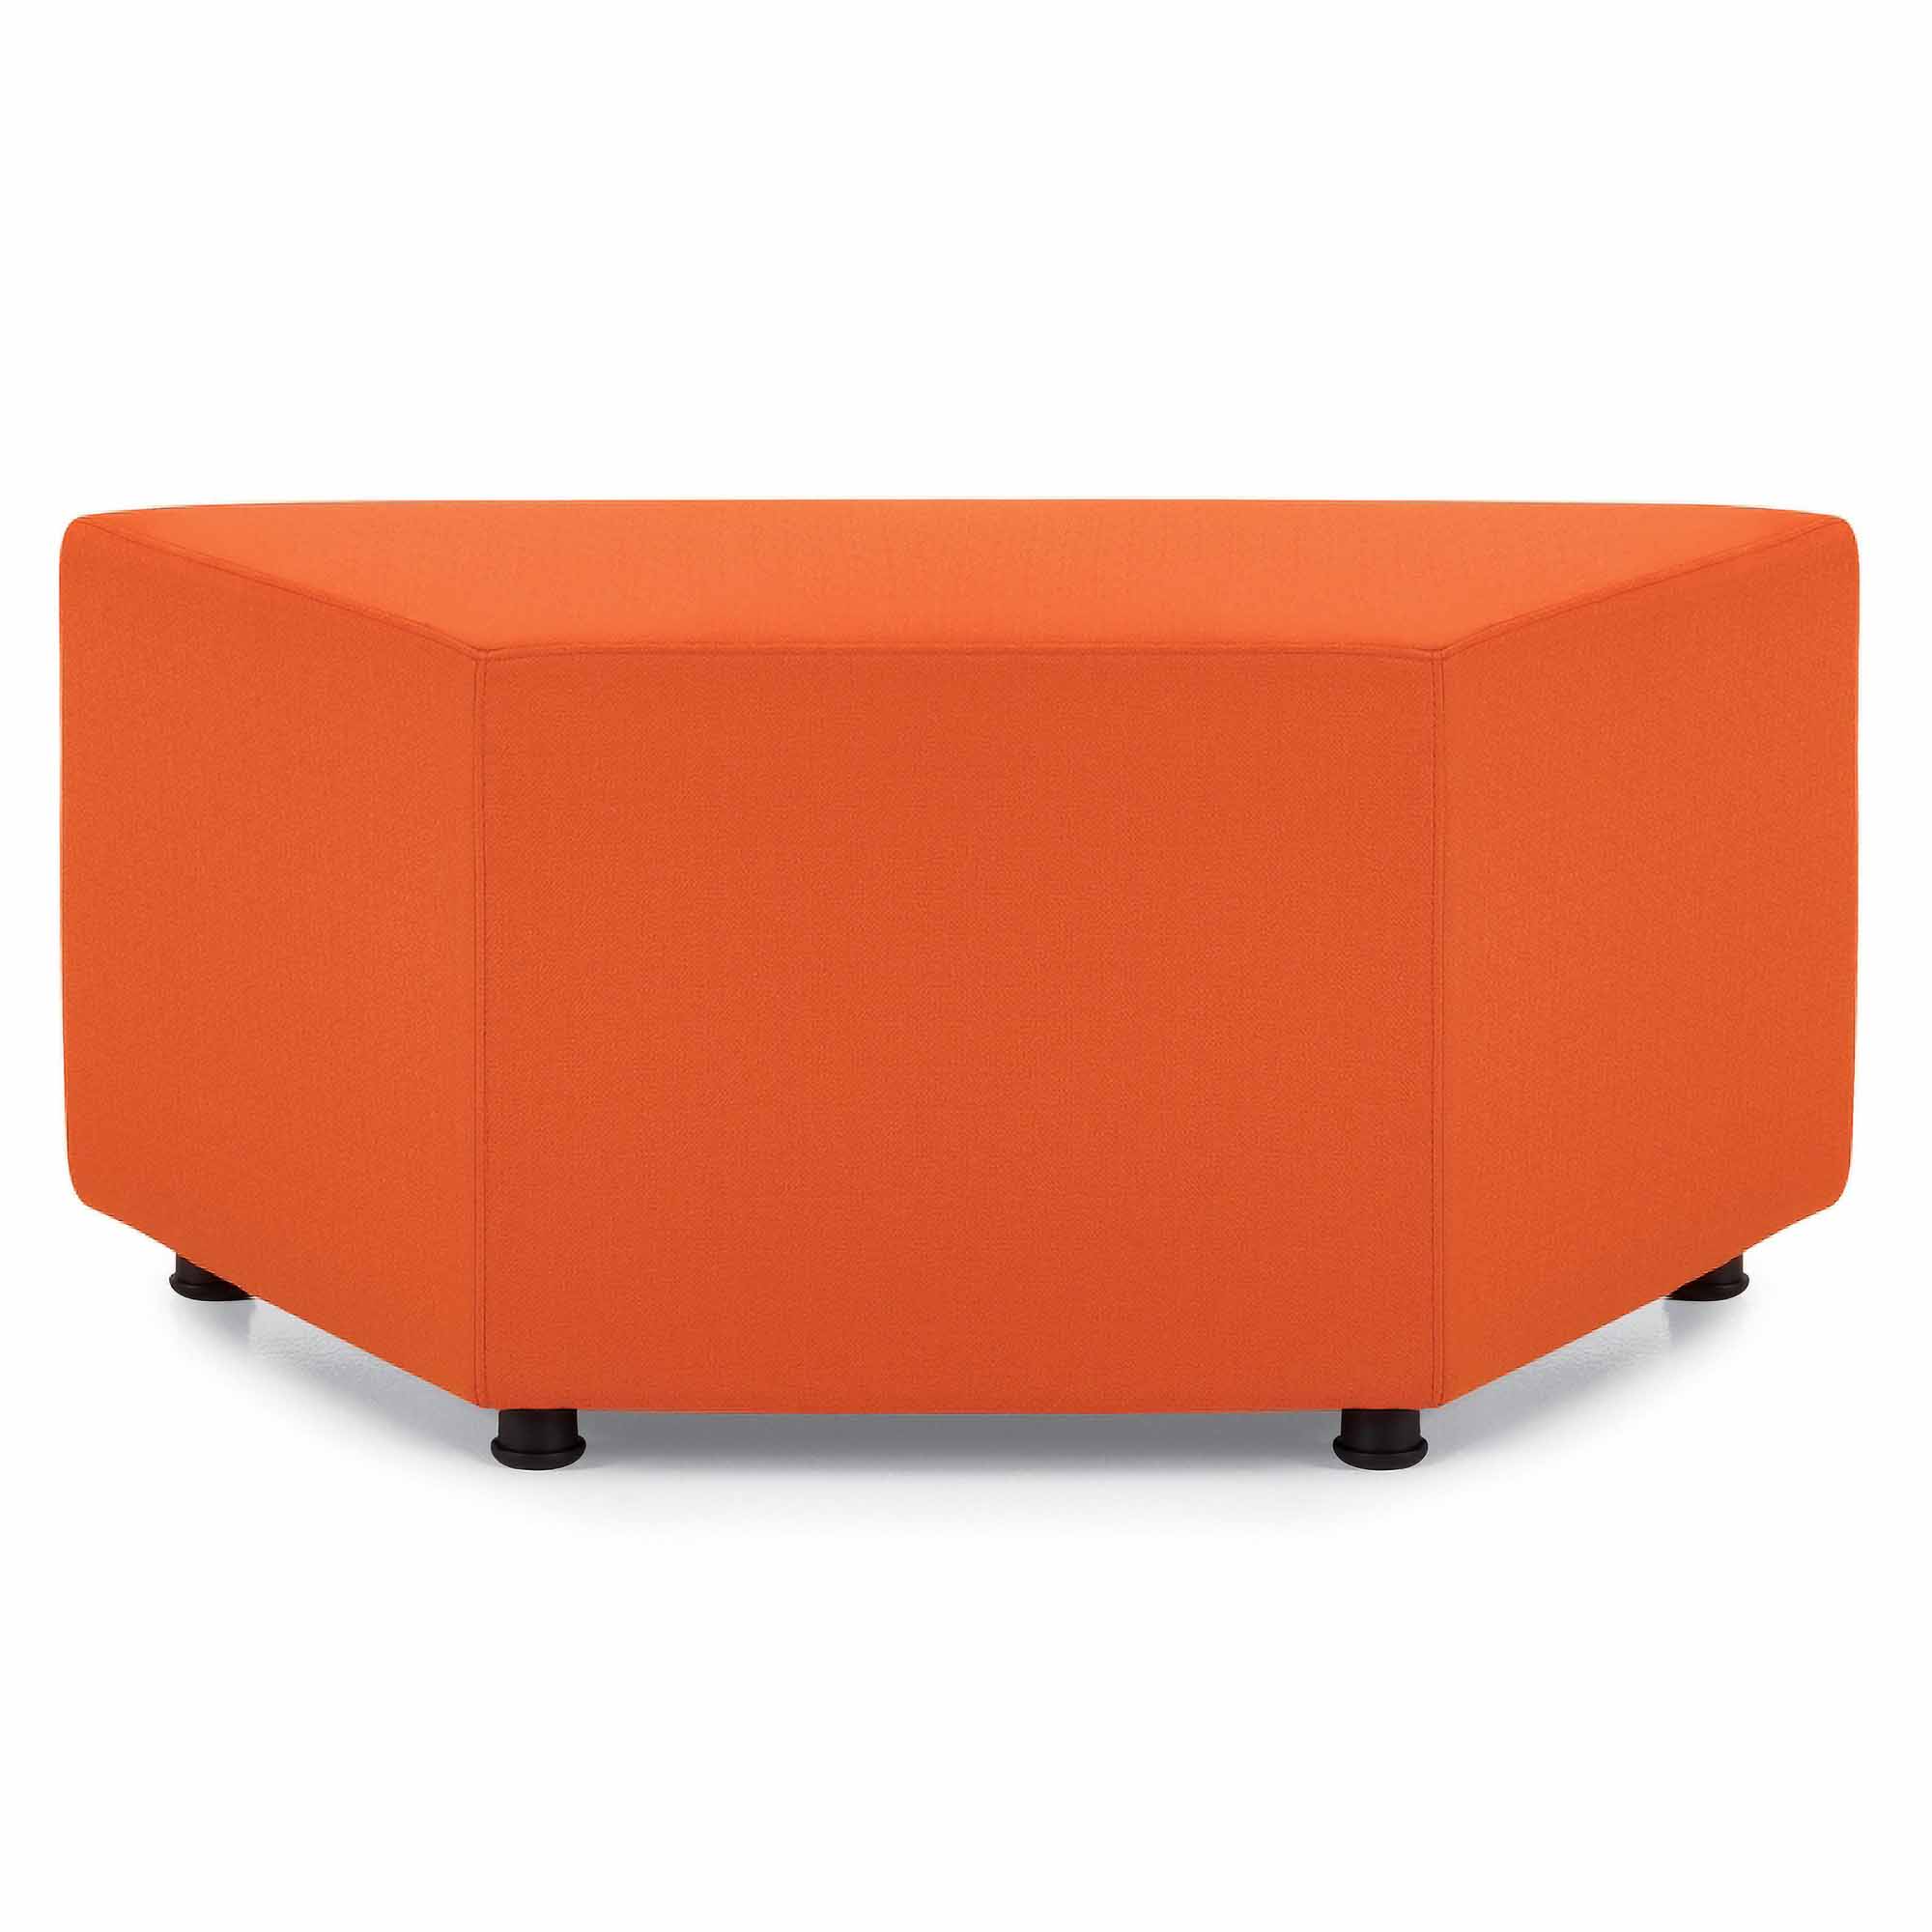 Reception ottoman wedge shaped front